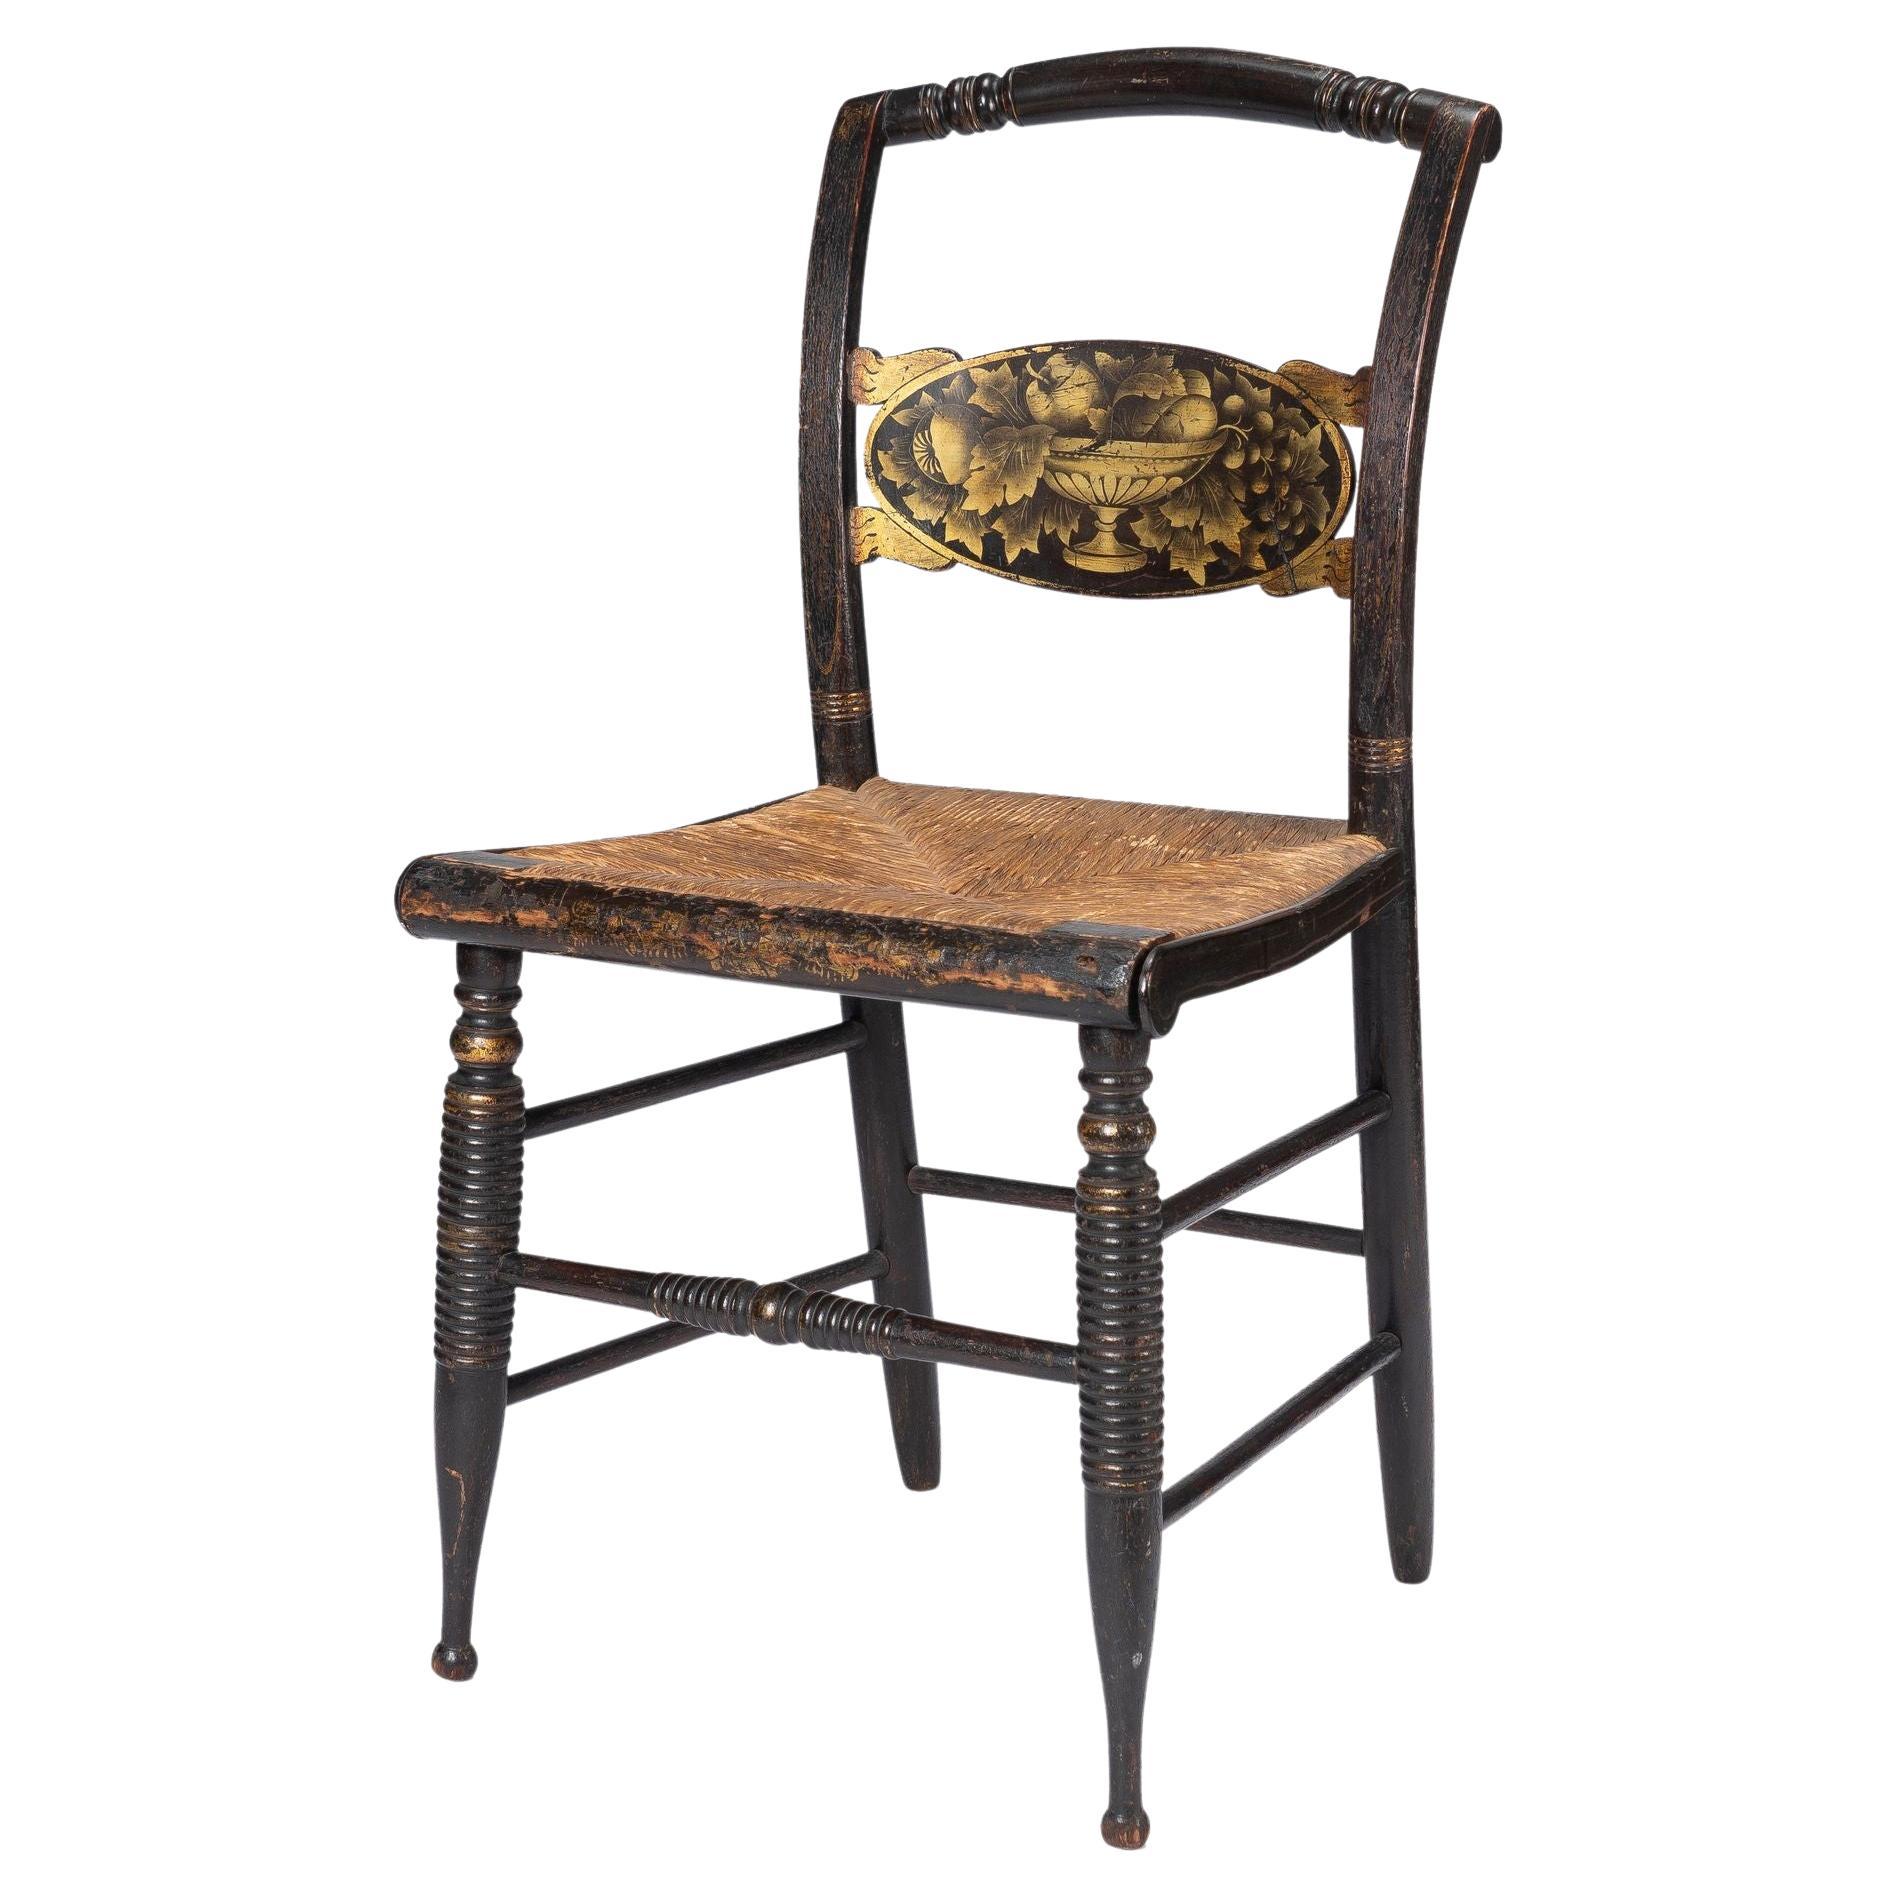 American Hitchcock turtle back rush seat side chair, 1830